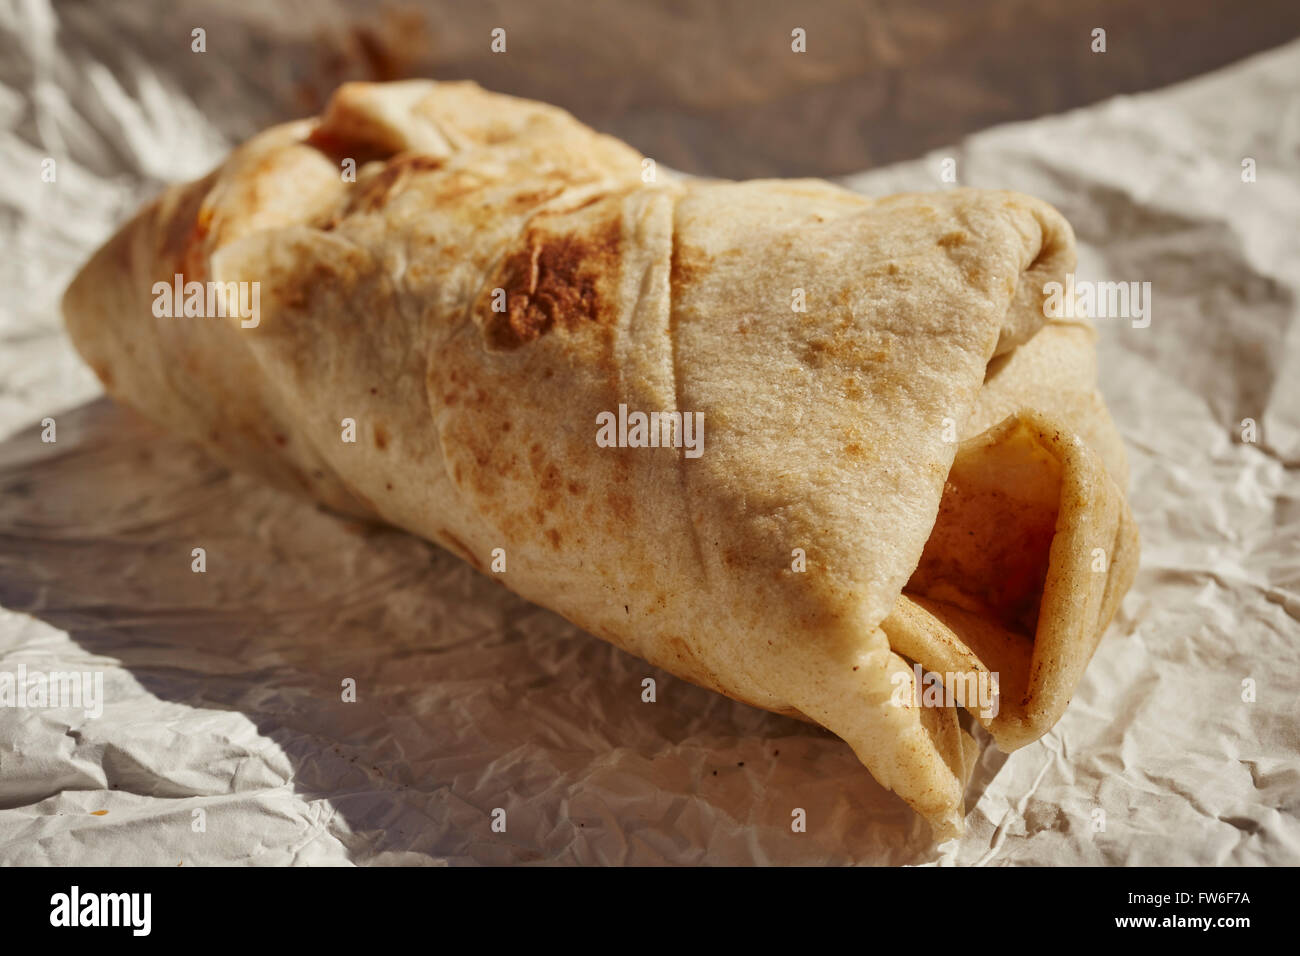 chicharrón filled burrito in the New Mexico style served at Abiquiu, NM, USA Stock Photo